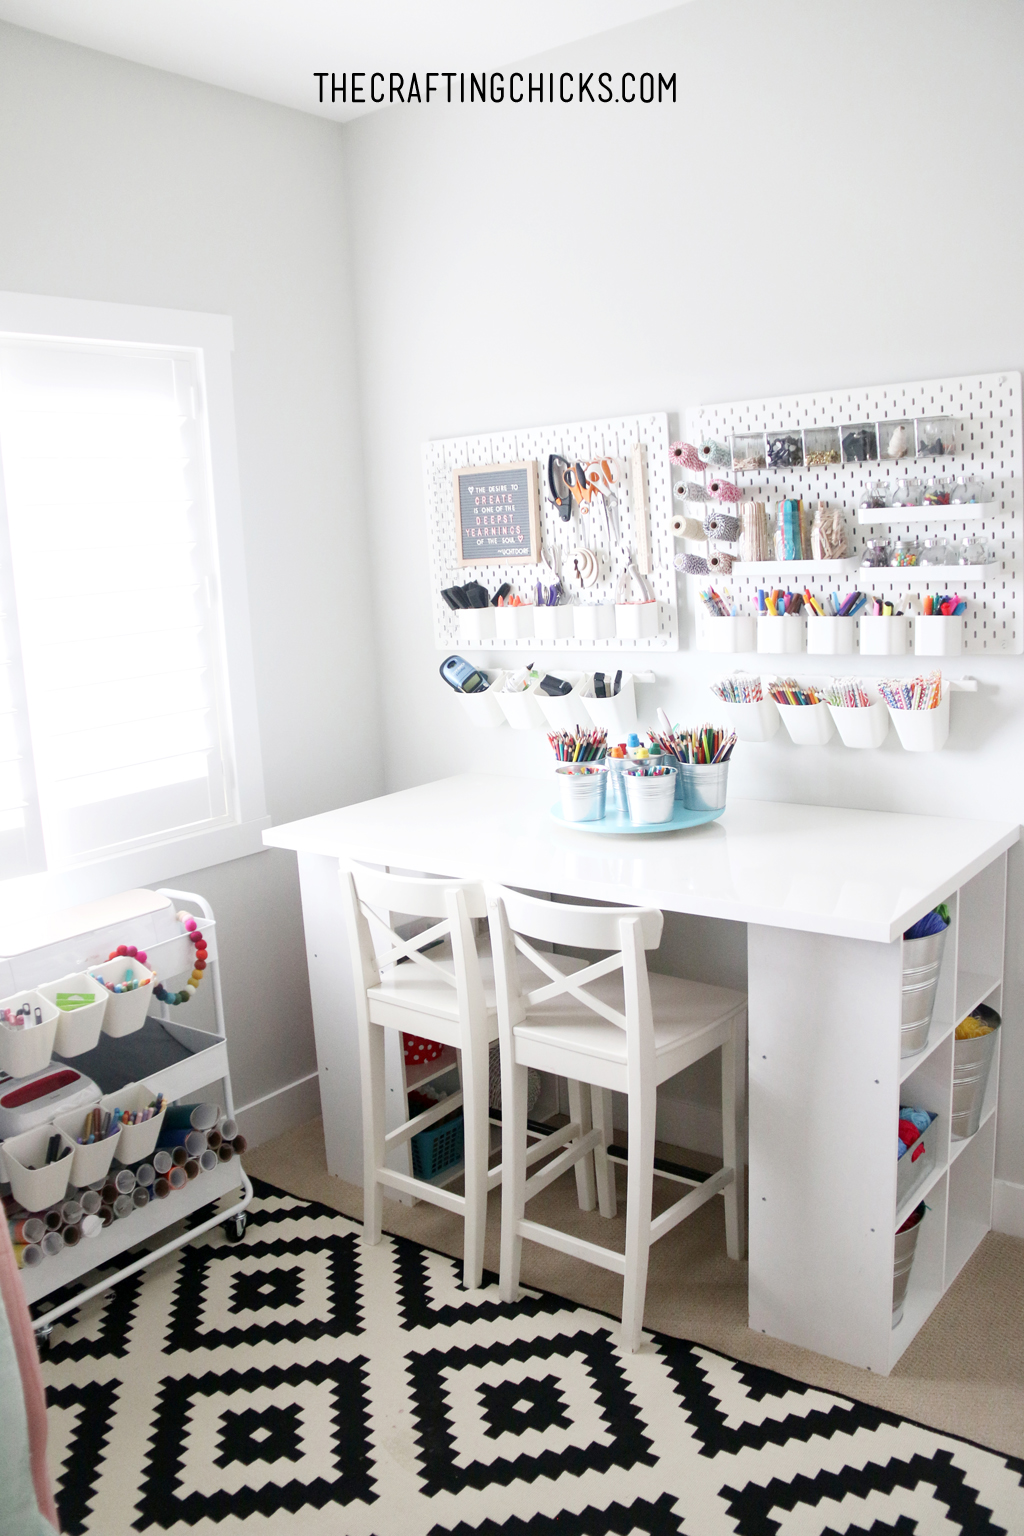 Top 10 Craft Rooms  Craft room tables, Small craft rooms, Craft room design